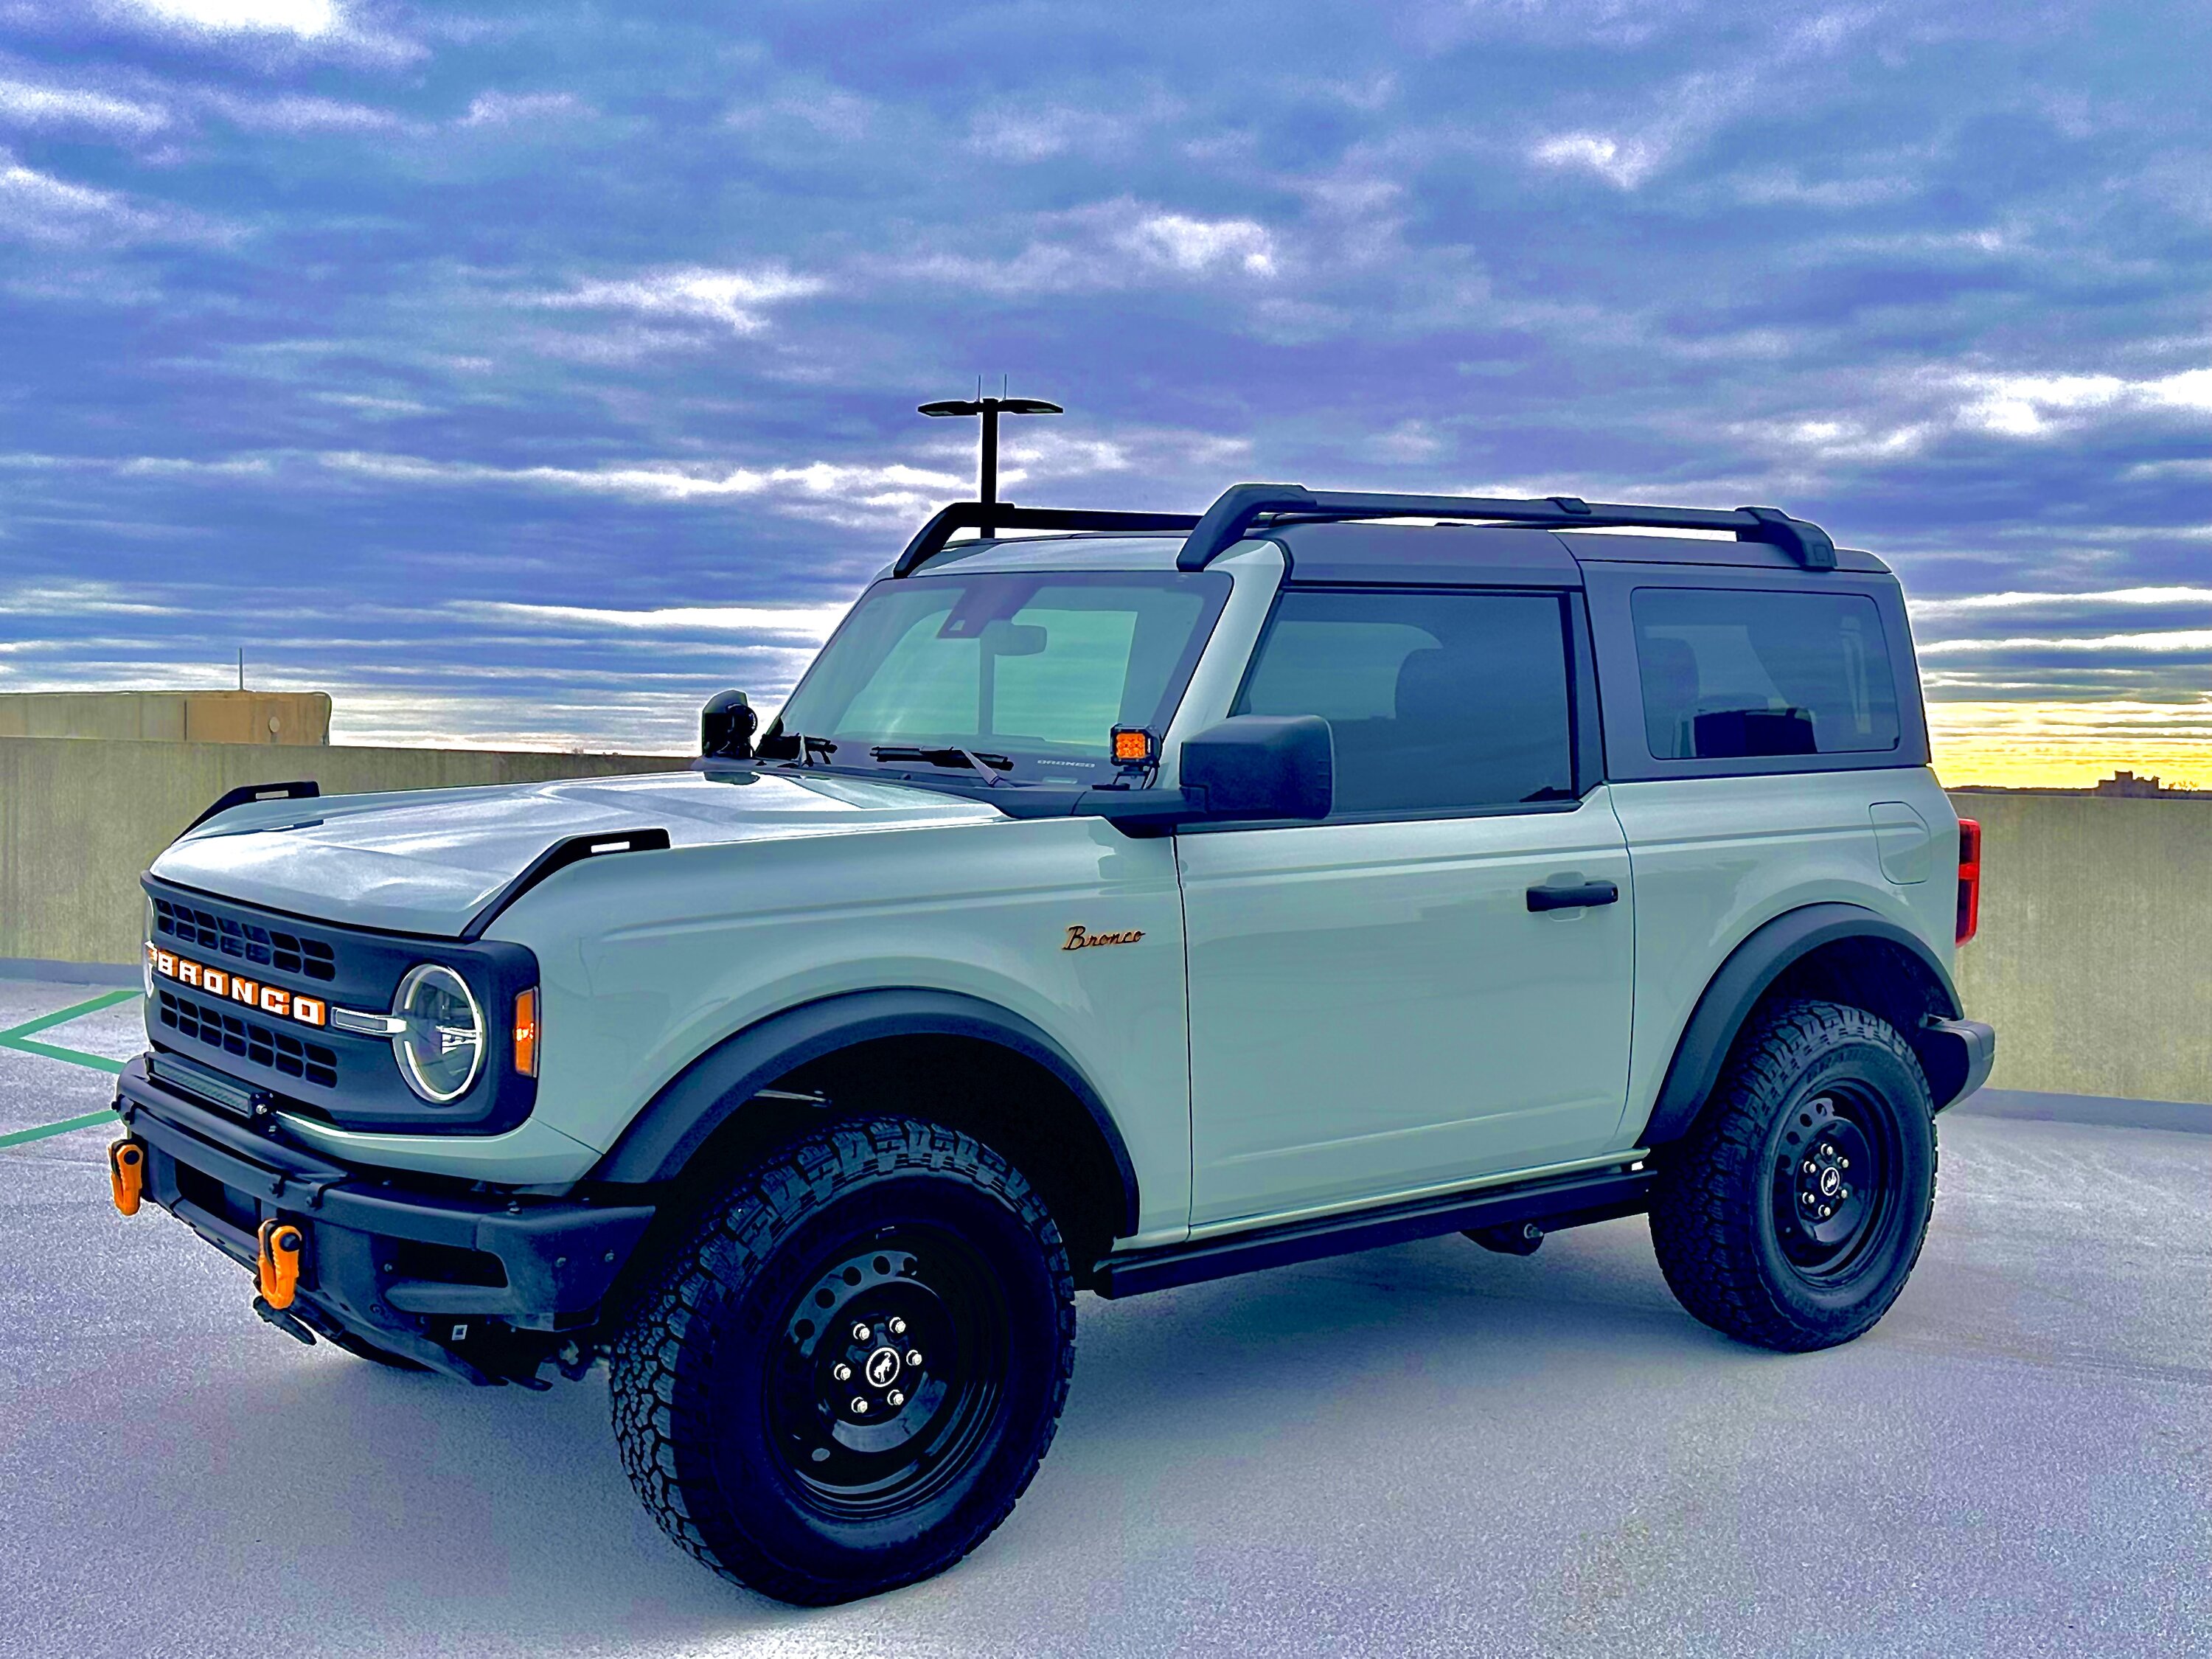 Ford Bronco Tint reference gallery -- post your Bronco pics & specs 📸 😎 280391EB-68E8-41F1-8F15-40AF028A20B0